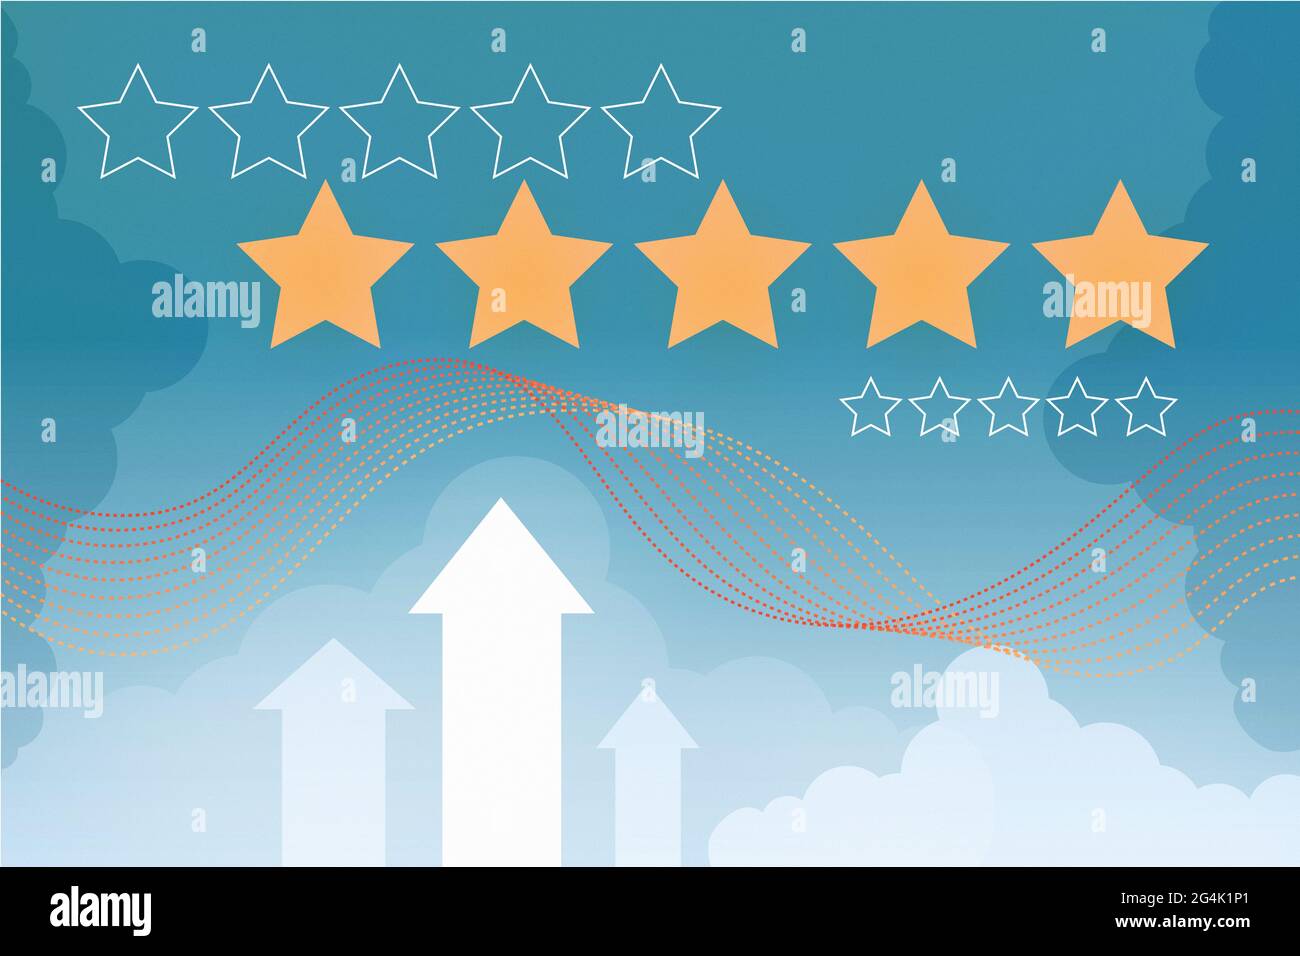 Rating five stars abstract illustration on blue baсkground for site. Customer, User feedback, review website, product evaluation, service, sharing exp Stock Photo